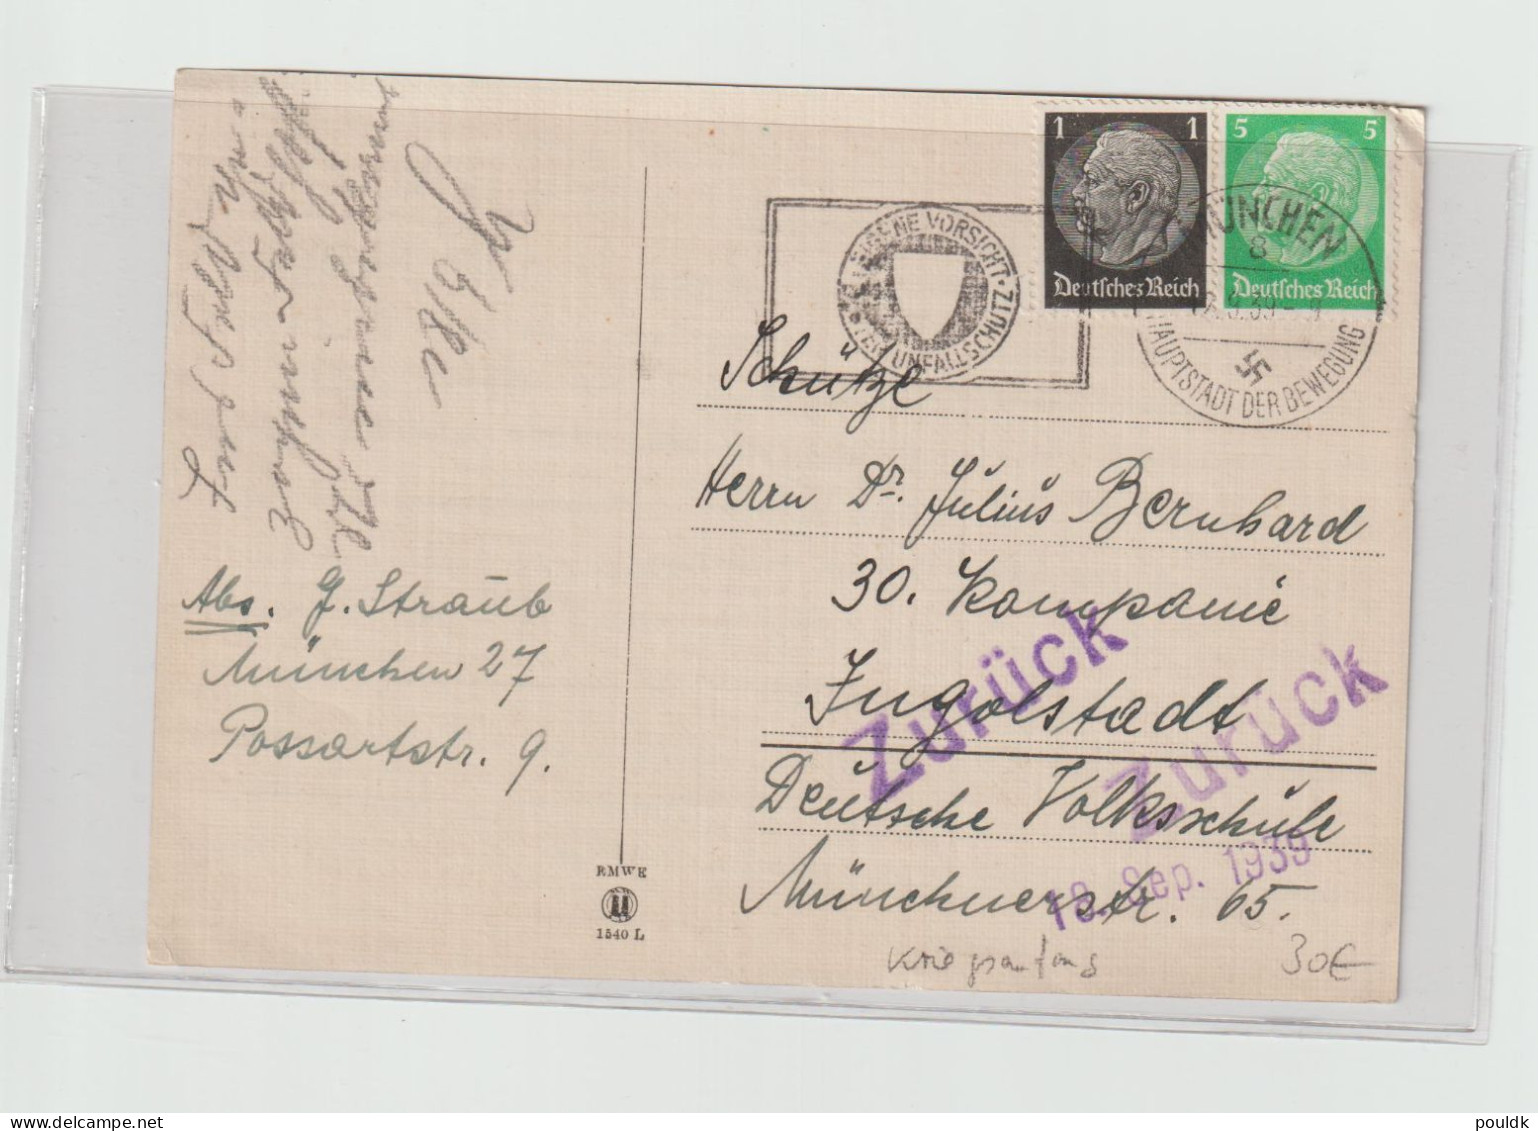 German Feldpost From The Outbreak Of WW2: Postcard To 30. Kompanie At A School In Ingolstadt However Returned Zurück Pos - Militares